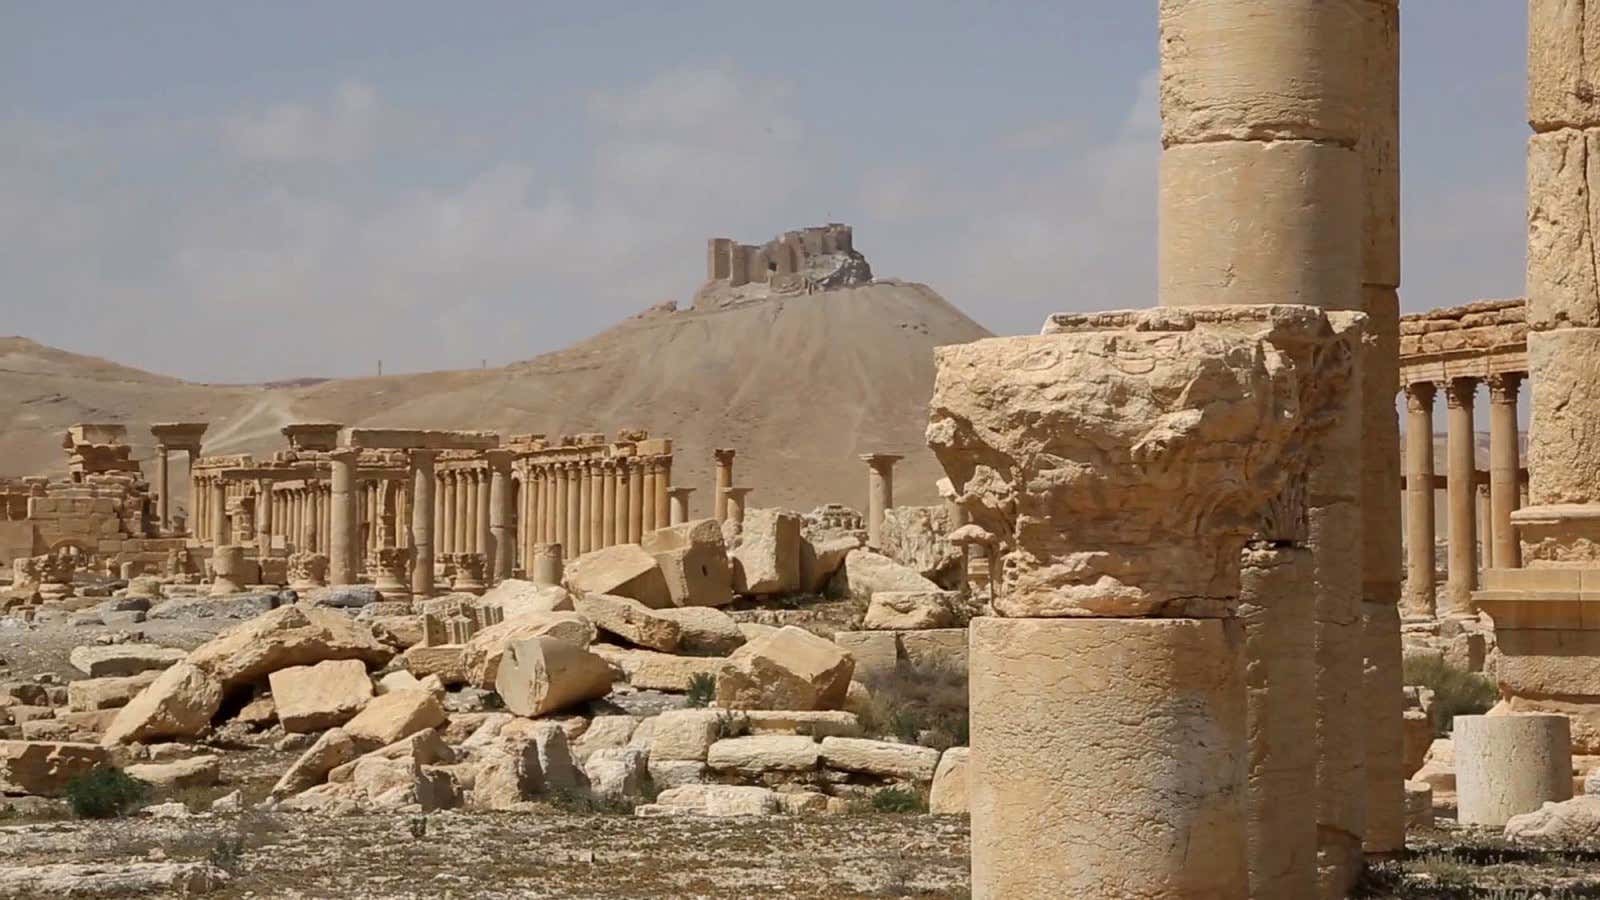 Palmyra was recently recaptured after months under ISIL control.